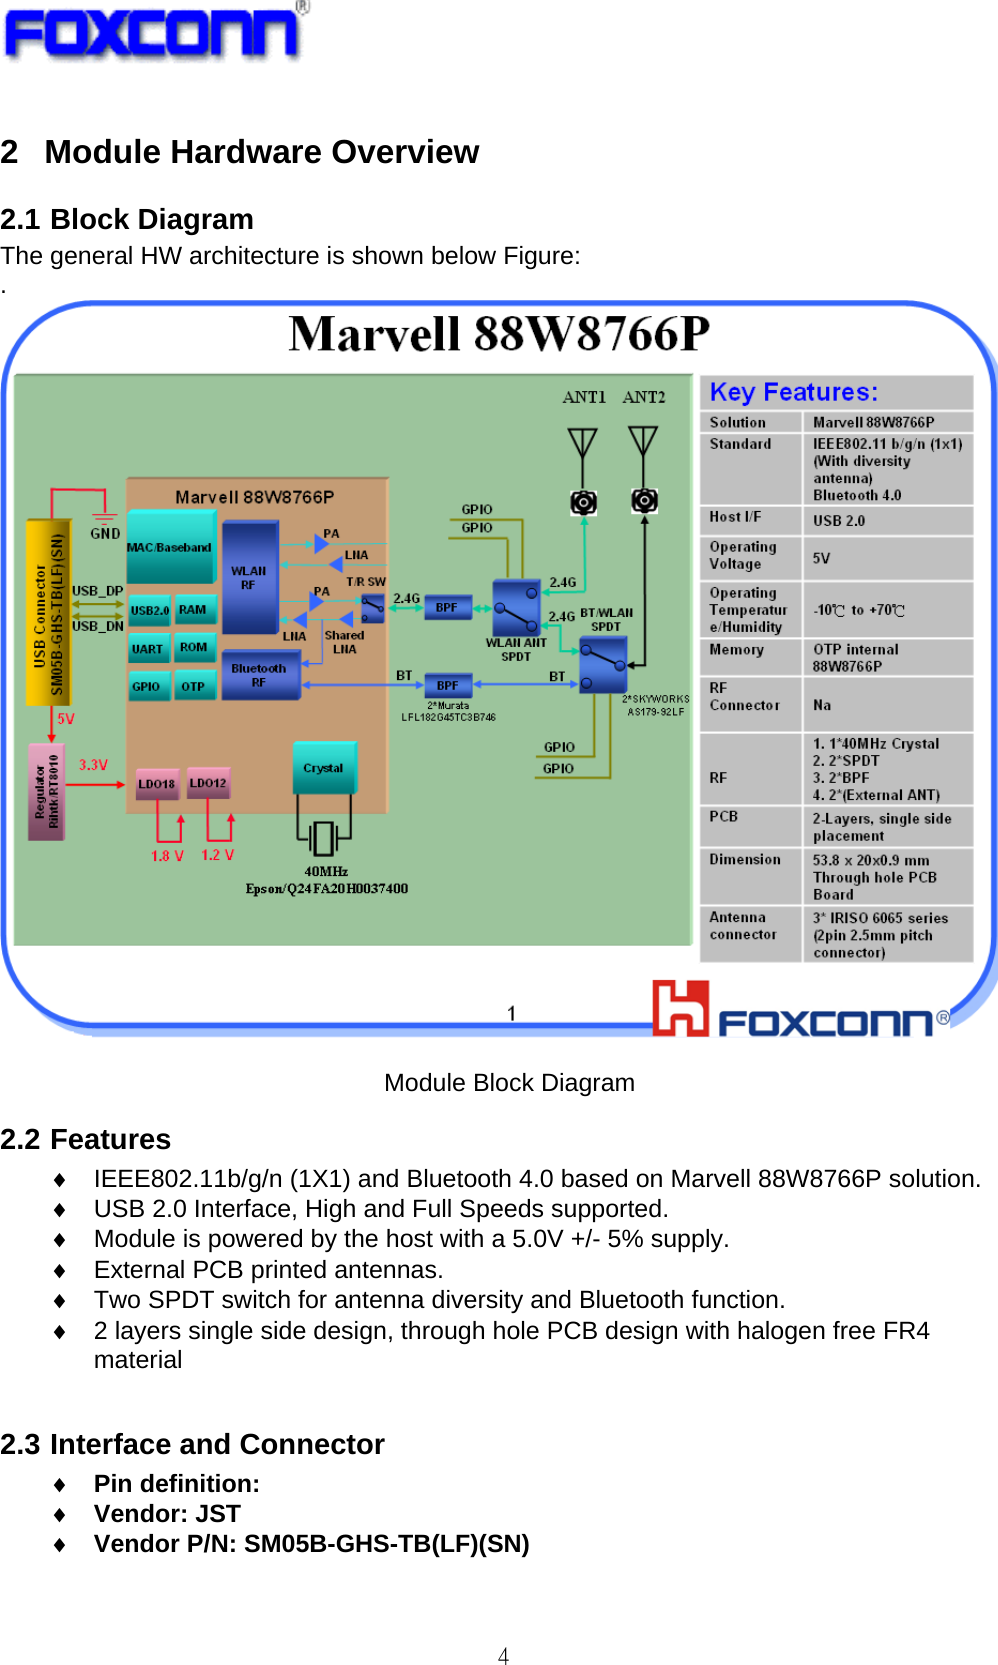   4 2  Module Hardware Overview 2.1 Block Diagram The general HW architecture is shown below Figure: .   Module Block Diagram 2.2 Features ♦  IEEE802.11b/g/n (1X1) and Bluetooth 4.0 based on Marvell 88W8766P solution. ♦  USB 2.0 Interface, High and Full Speeds supported. ♦  Module is powered by the host with a 5.0V +/- 5% supply. ♦  External PCB printed antennas. ♦  Two SPDT switch for antenna diversity and Bluetooth function. ♦  2 layers single side design, through hole PCB design with halogen free FR4 material   2.3 Interface and Connector ♦ Pin definition:   ♦ Vendor: JST ♦ Vendor P/N: SM05B-GHS-TB(LF)(SN)  